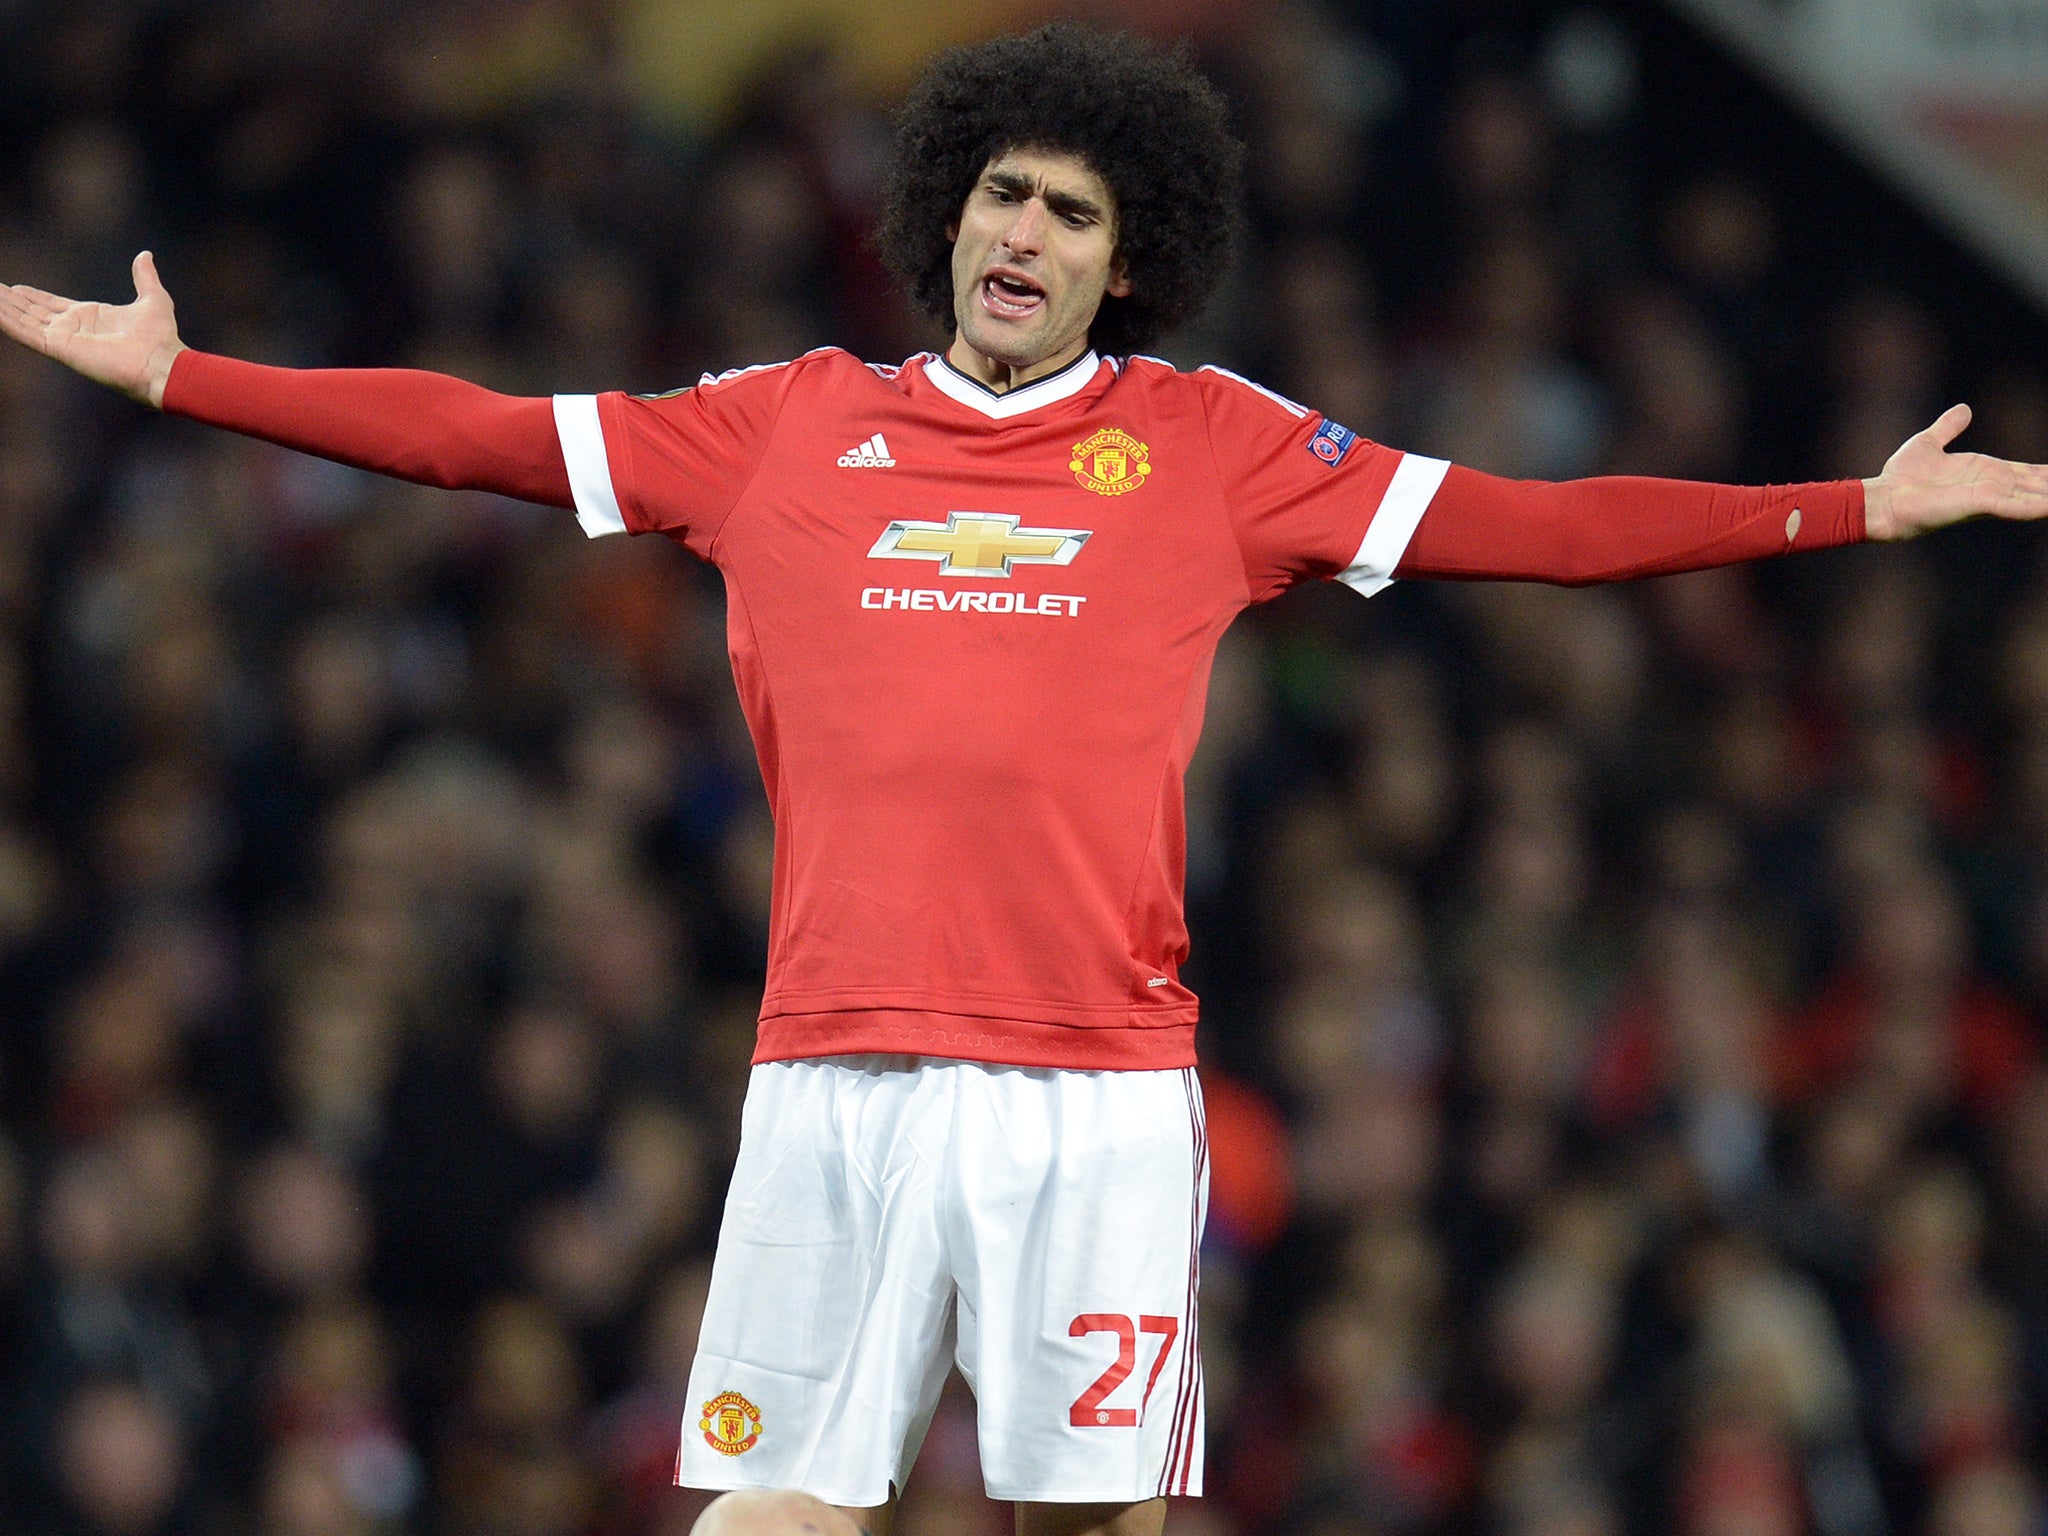 Marouane Fellaini protests after receiving a yellow card against Liverpool